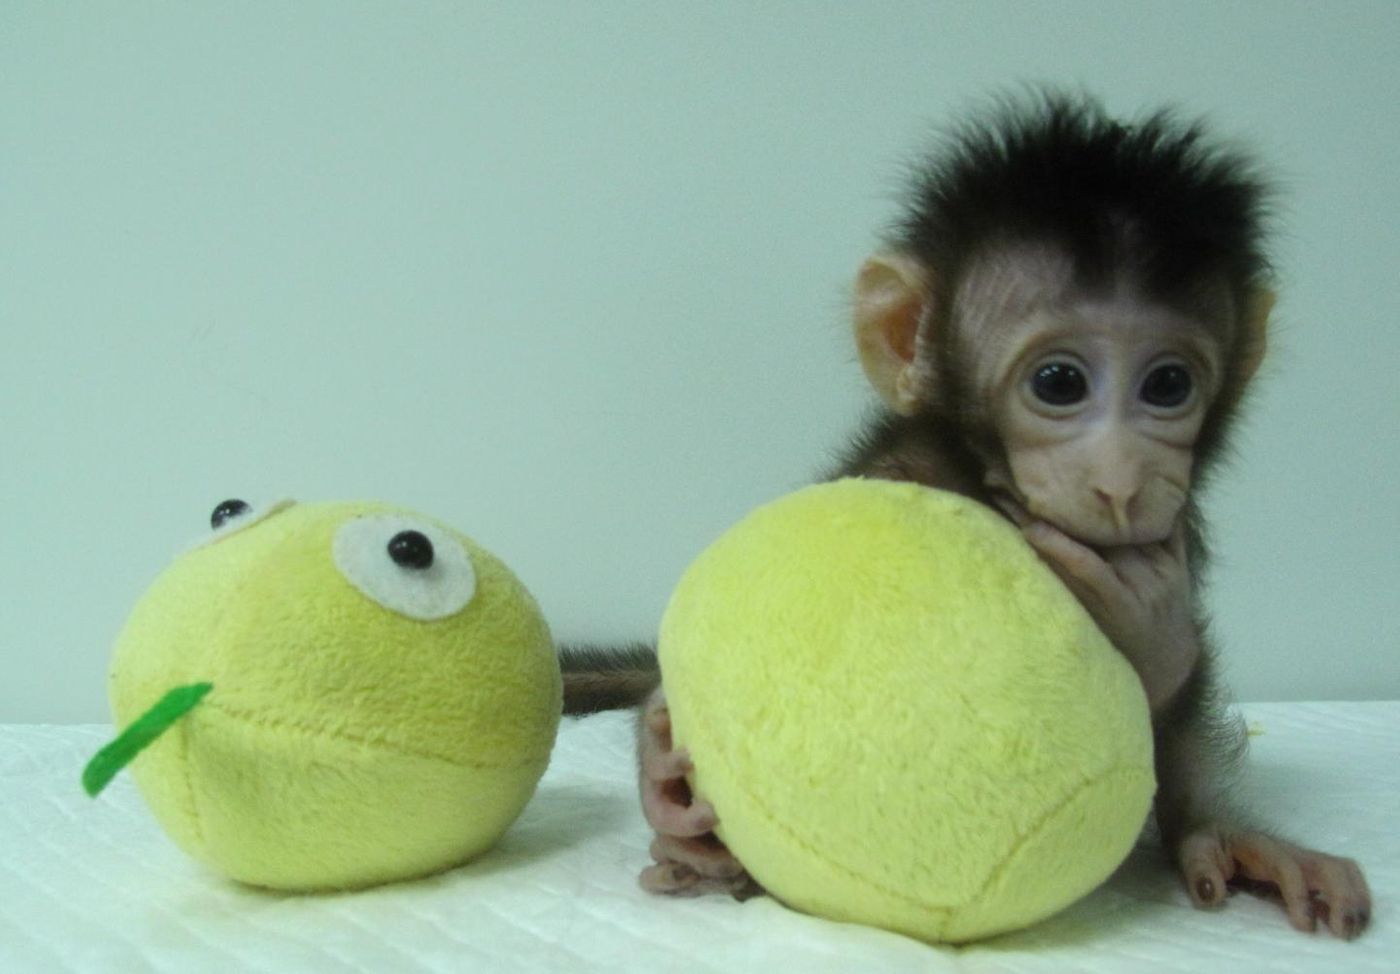 This is a photograph of Hua Hua, one of the first monkey clones made by somatic cell nuclear transfer. / Credit: Qiang Sun and Mu-ming Poo / Chinese Academy of Sciences